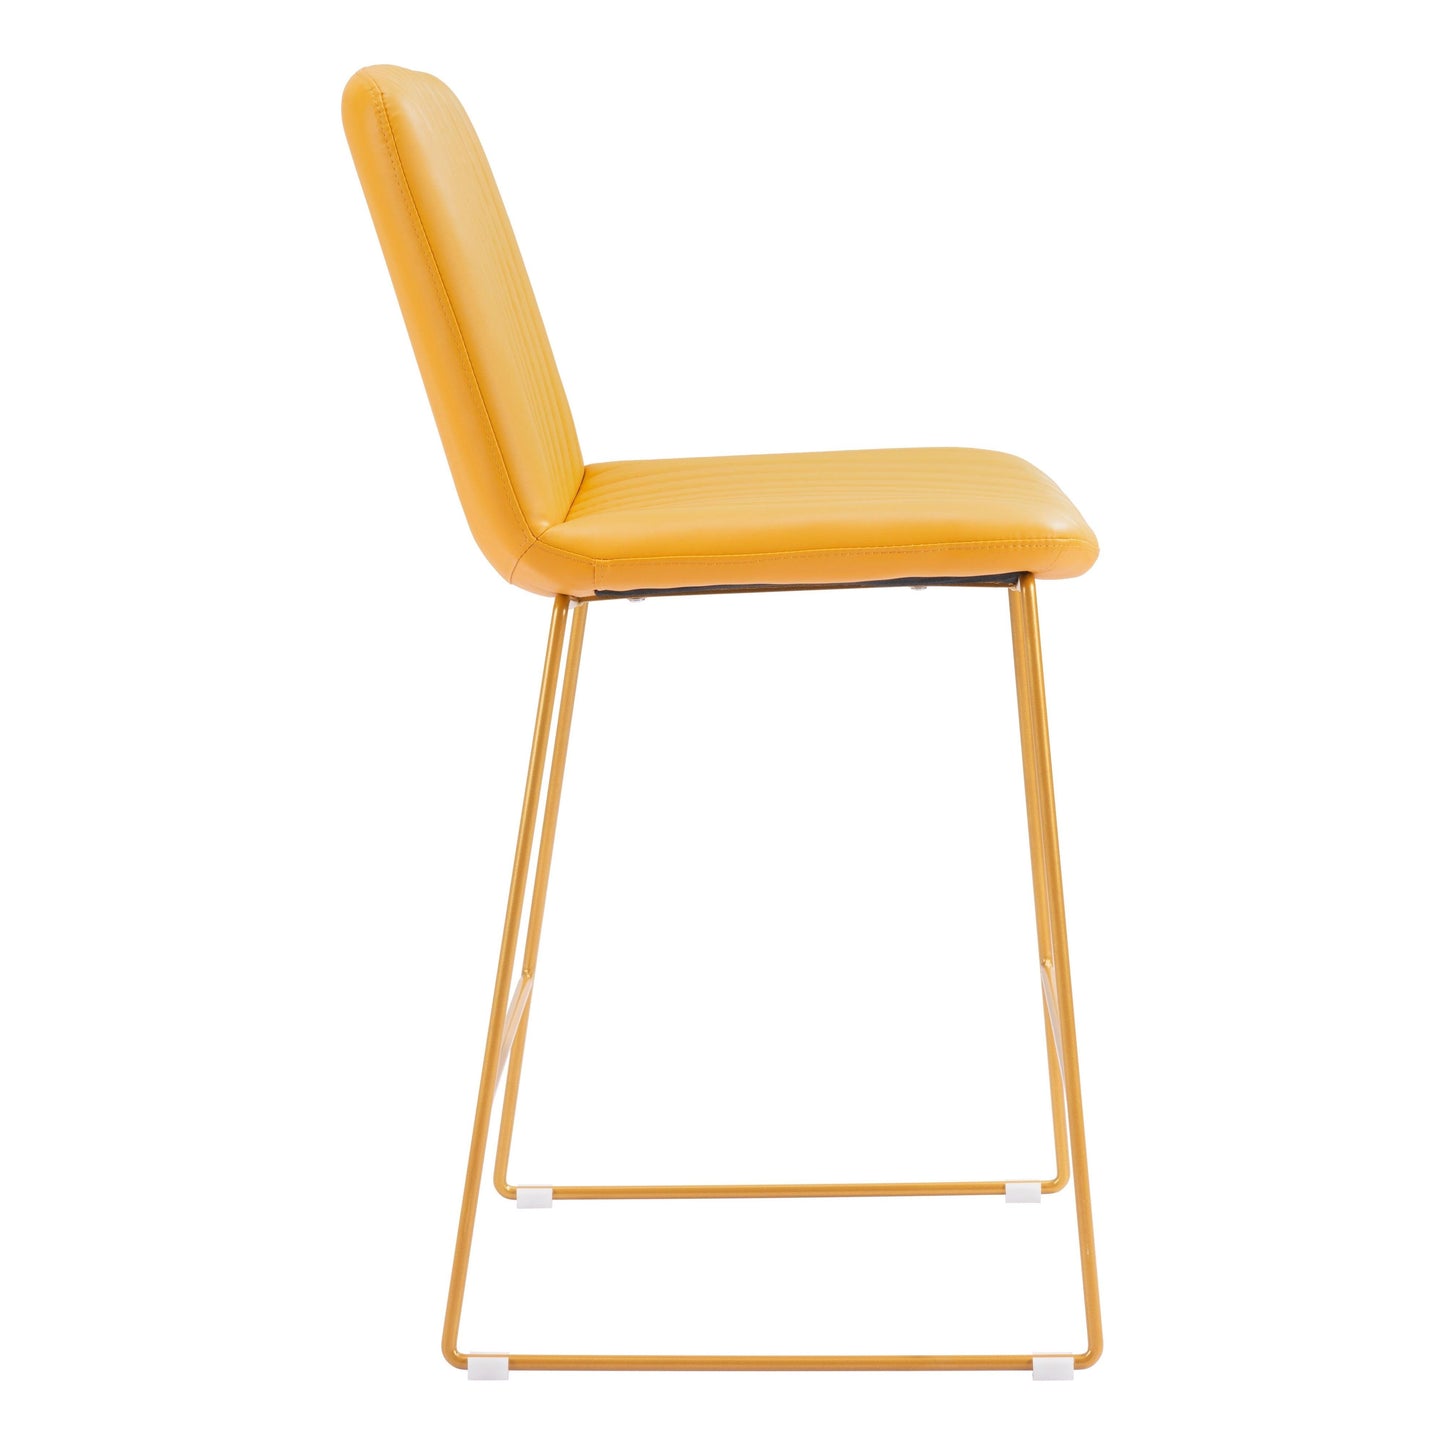 Mode Counter Chair (Set of 2) Yellow - Sideboards and Things Back Type_With Back, Brand_Zuo Modern, Color_Yellow, Depth_20-30, Finish_Powder Coated, Height_30-40, Materials_Metal, Materials_Upholstery, Metal Type_Steel, Number of Pieces_2PC Set, Product Type_Counter Height, Upholstery Type_Leather, Upholstery Type_Vegan Leather, Width_20-30